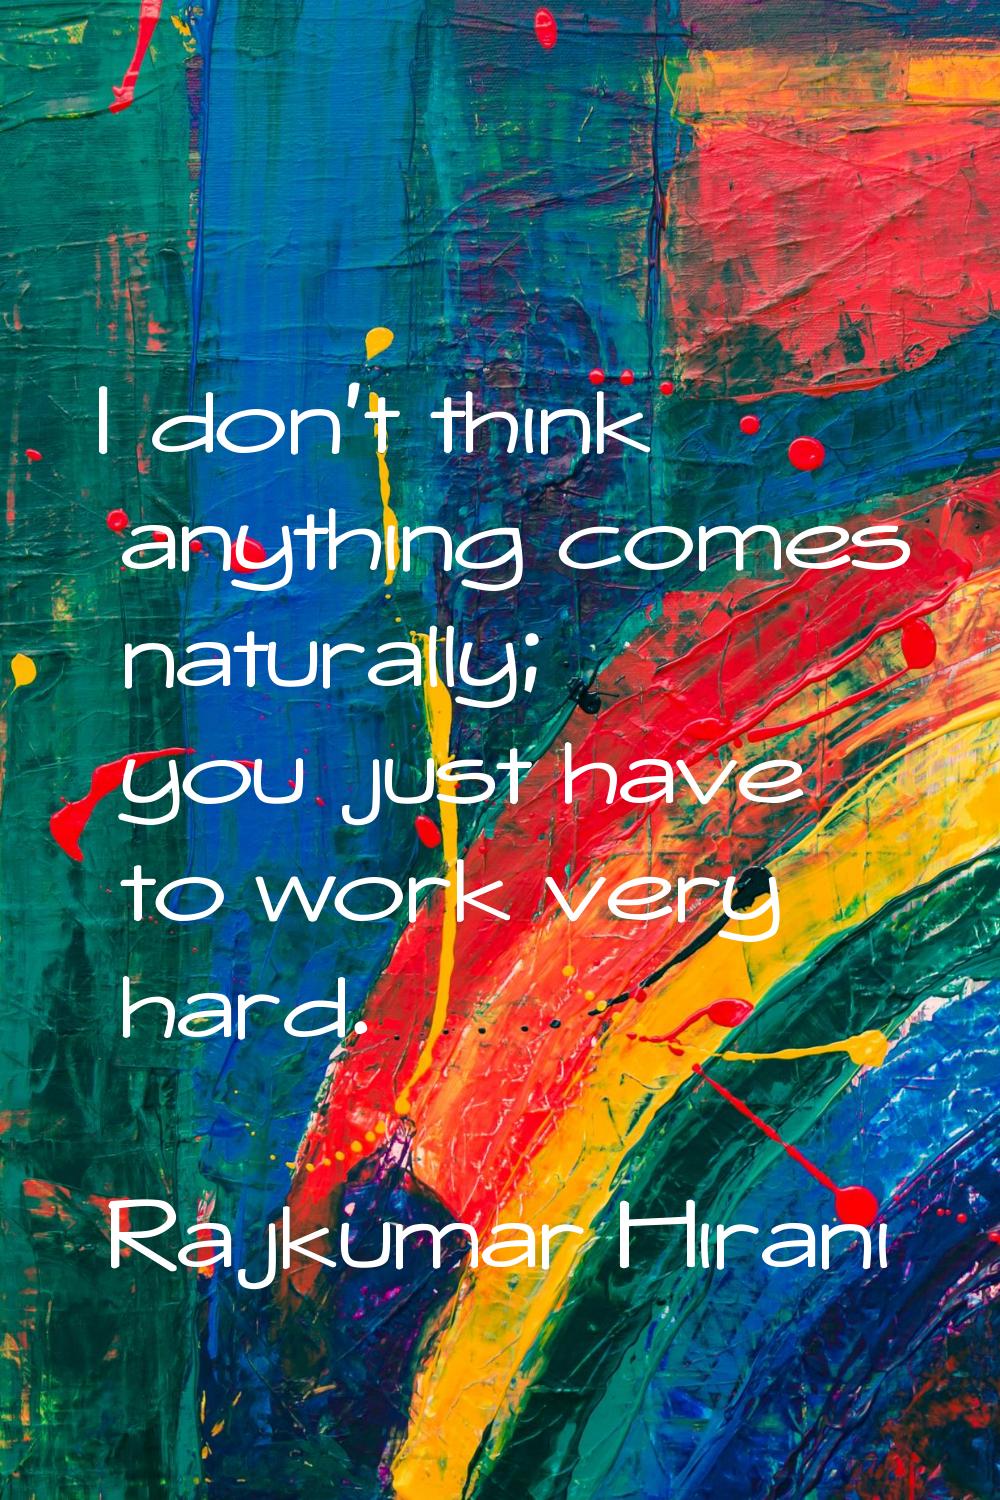 I don't think anything comes naturally; you just have to work very hard.